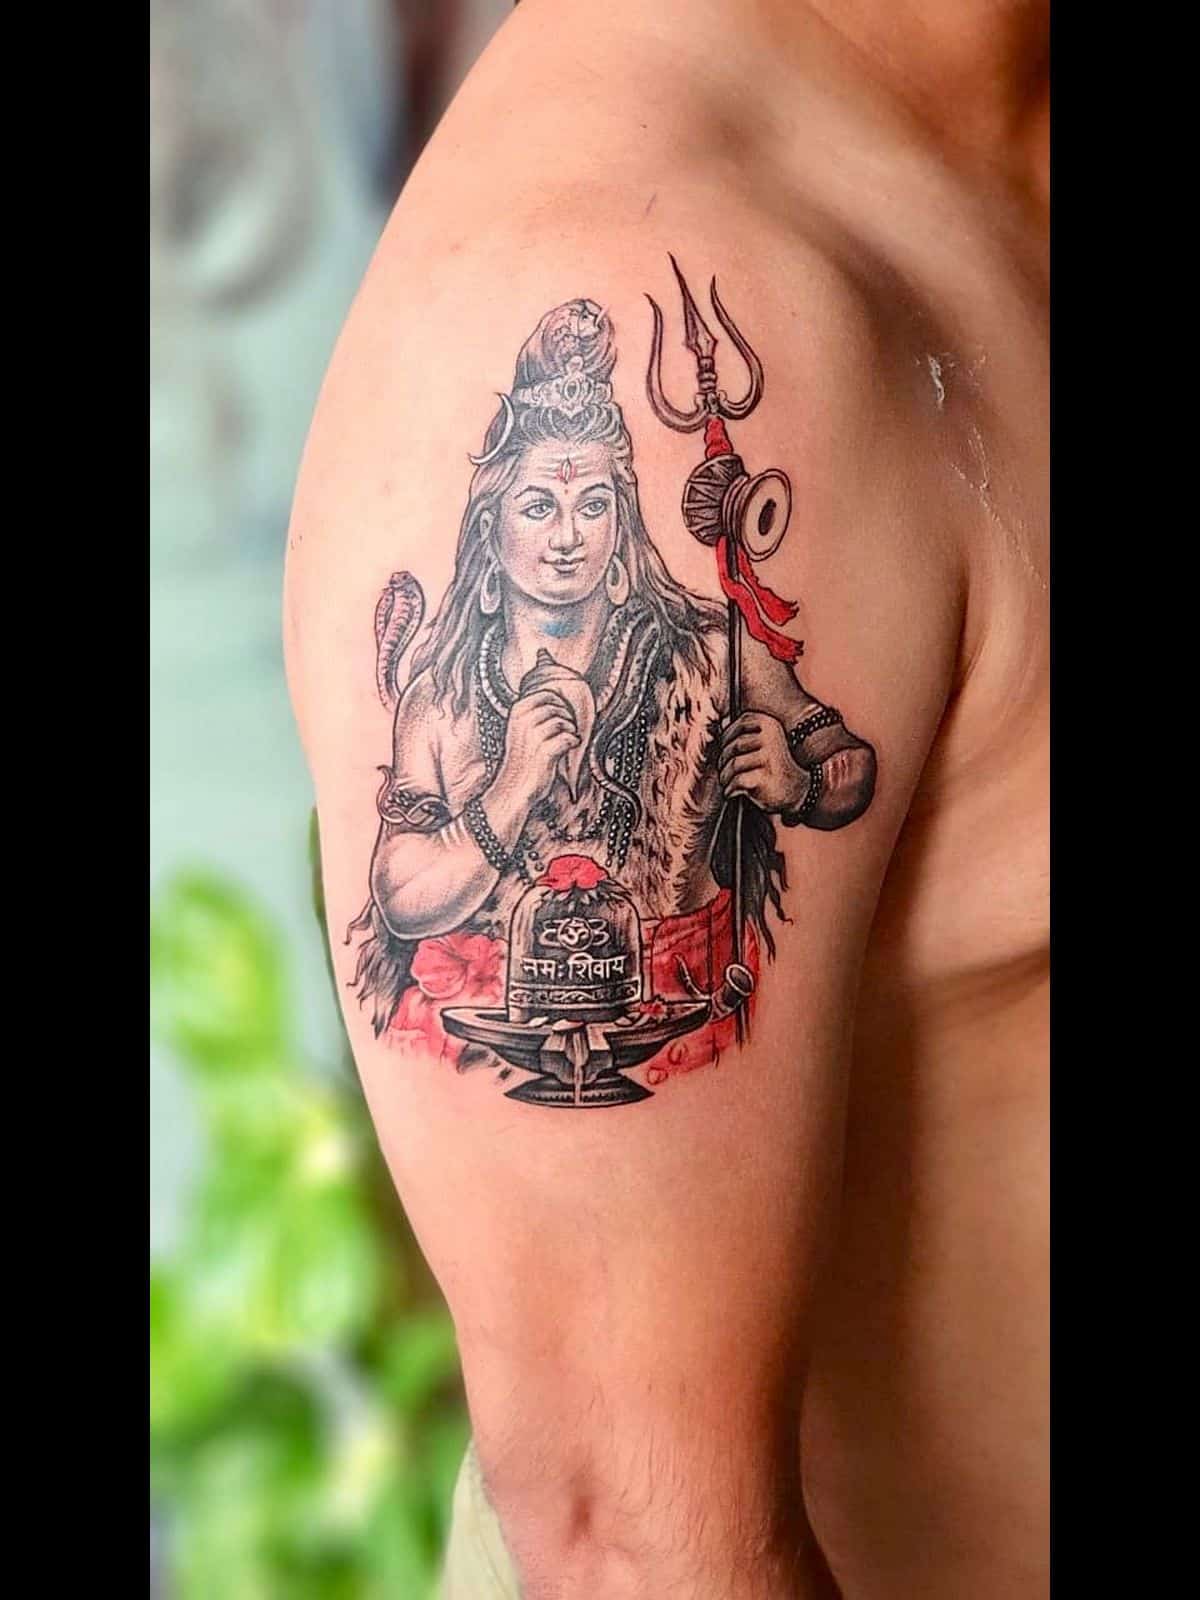 101 Amazing Shiva Tattoo Designs You Need To See! | Shiva tattoo design,  Shiva tattoo, Trishul tattoo designs